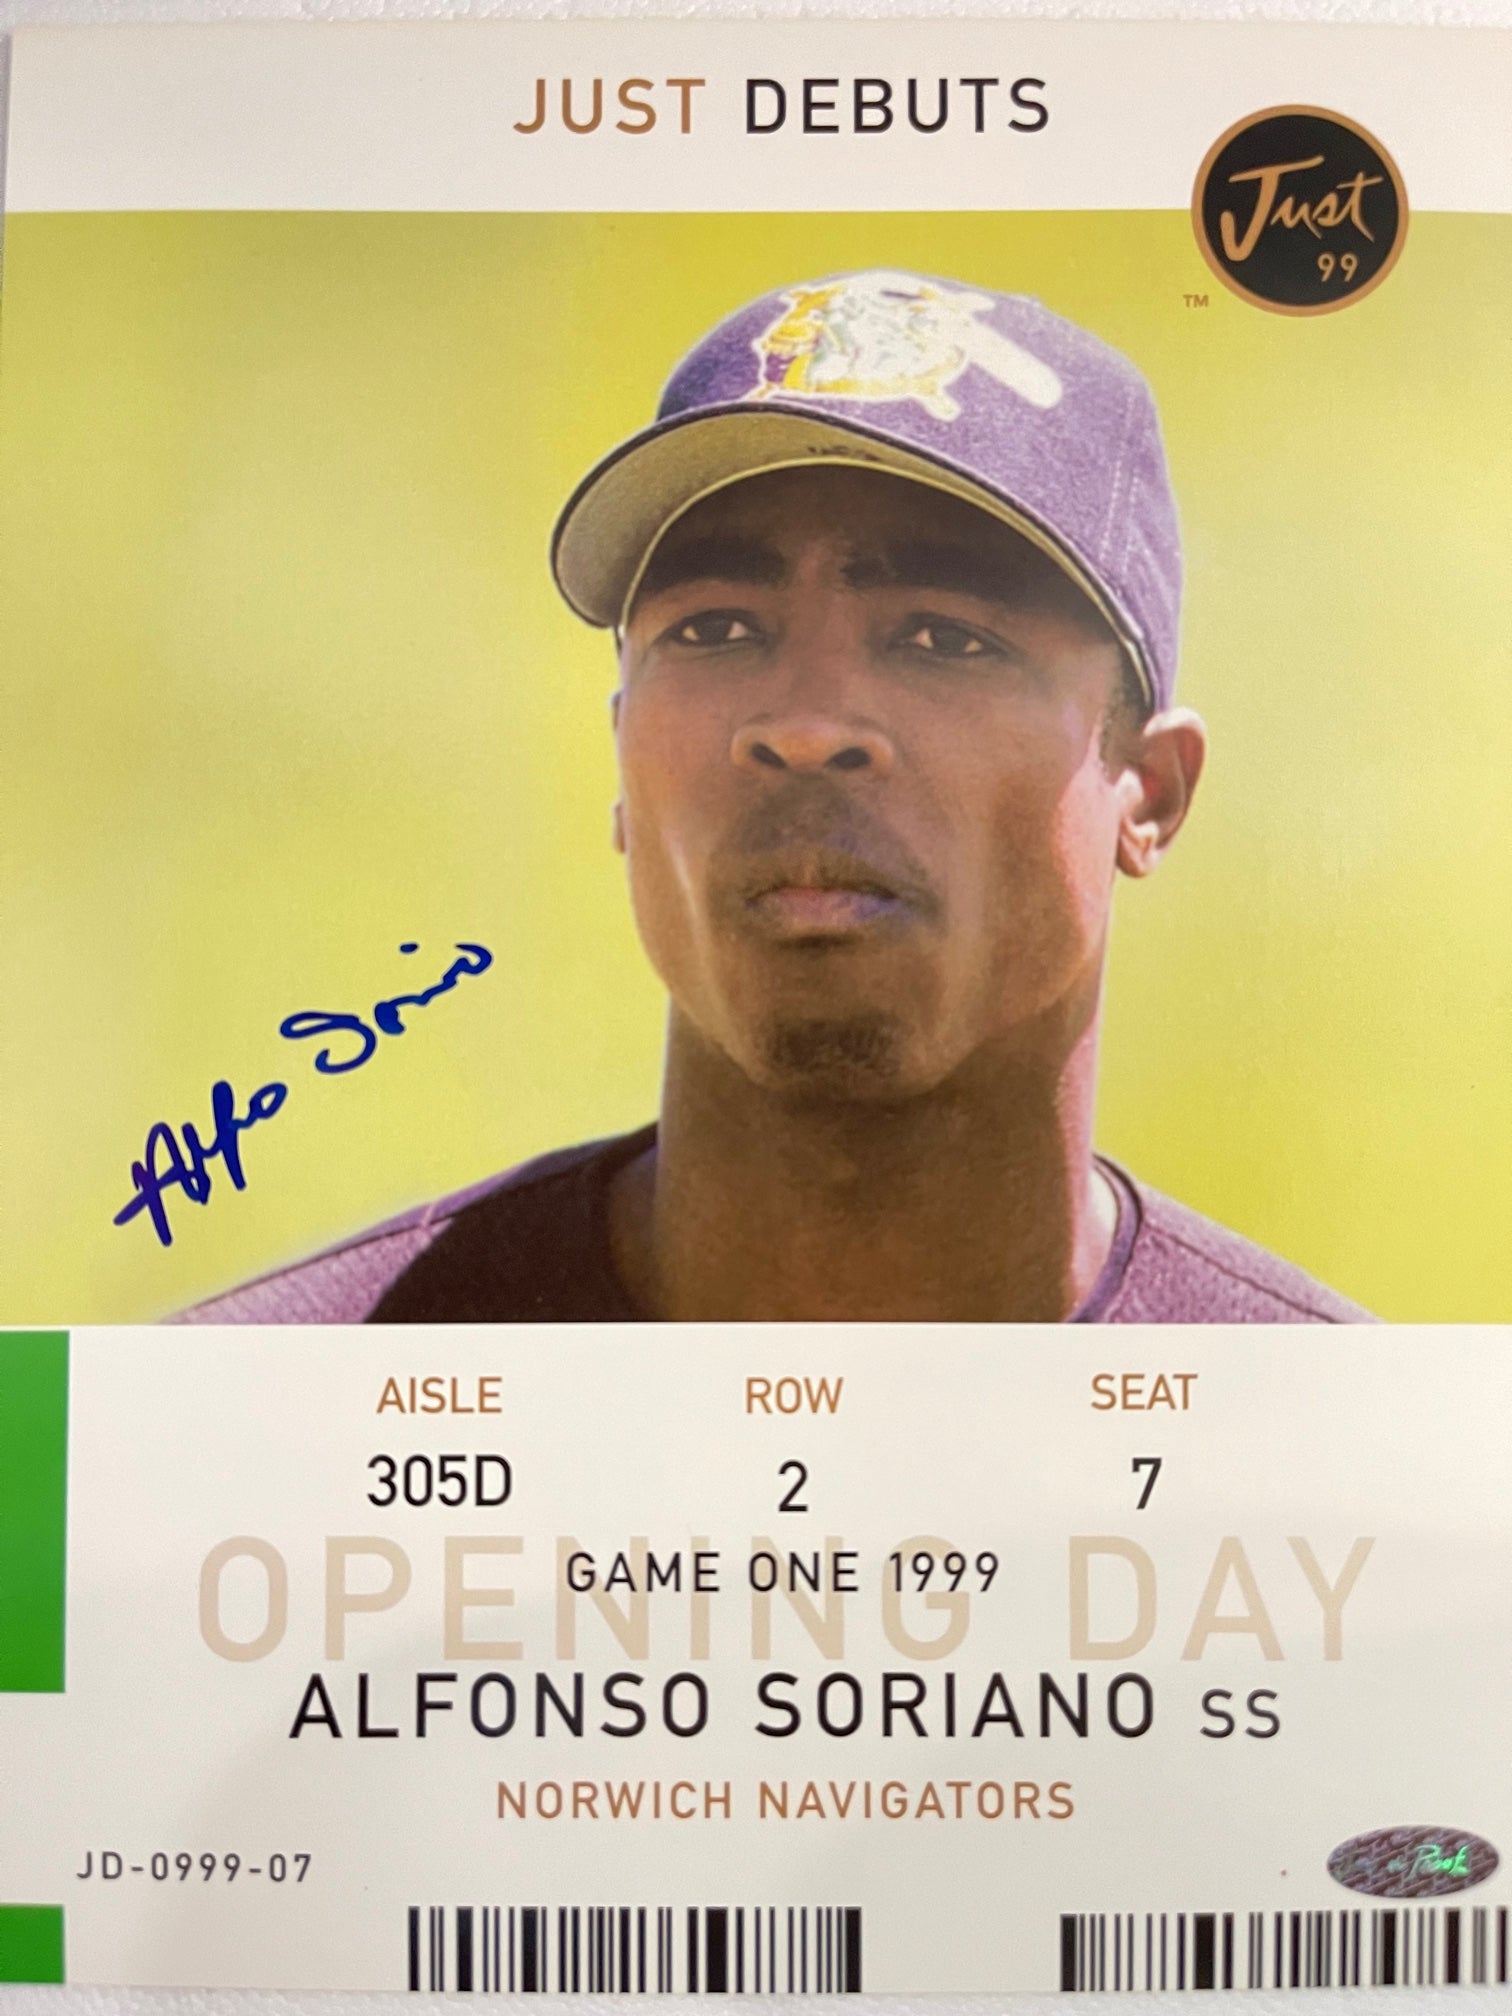 Alfonso Soriano Autographed Memorabilia  Signed Photo, Jersey,  Collectibles & Merchandise